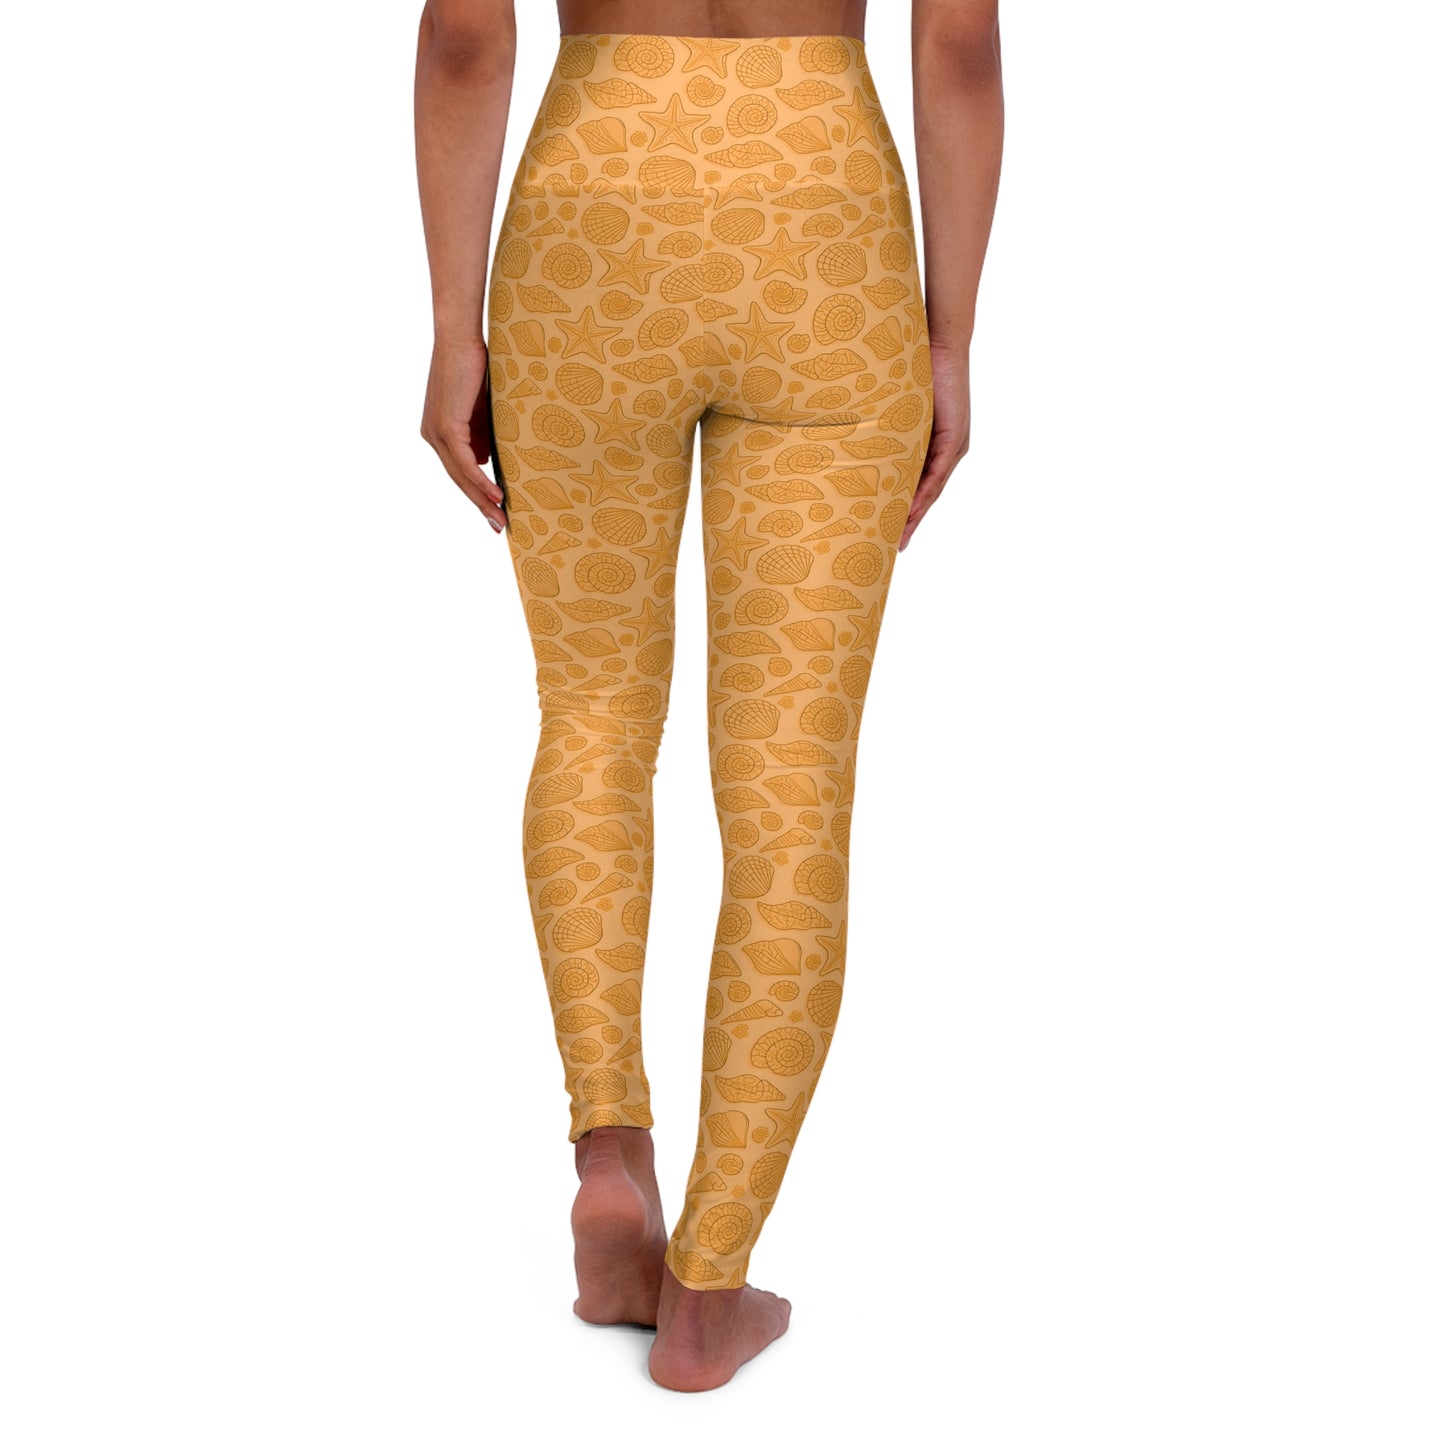 Dive into Enchantment with Mermaid Style Orange Starfish and Seashell Leggings Magical High Waisted Yoga Pants, Gym Workout Woman Activewear